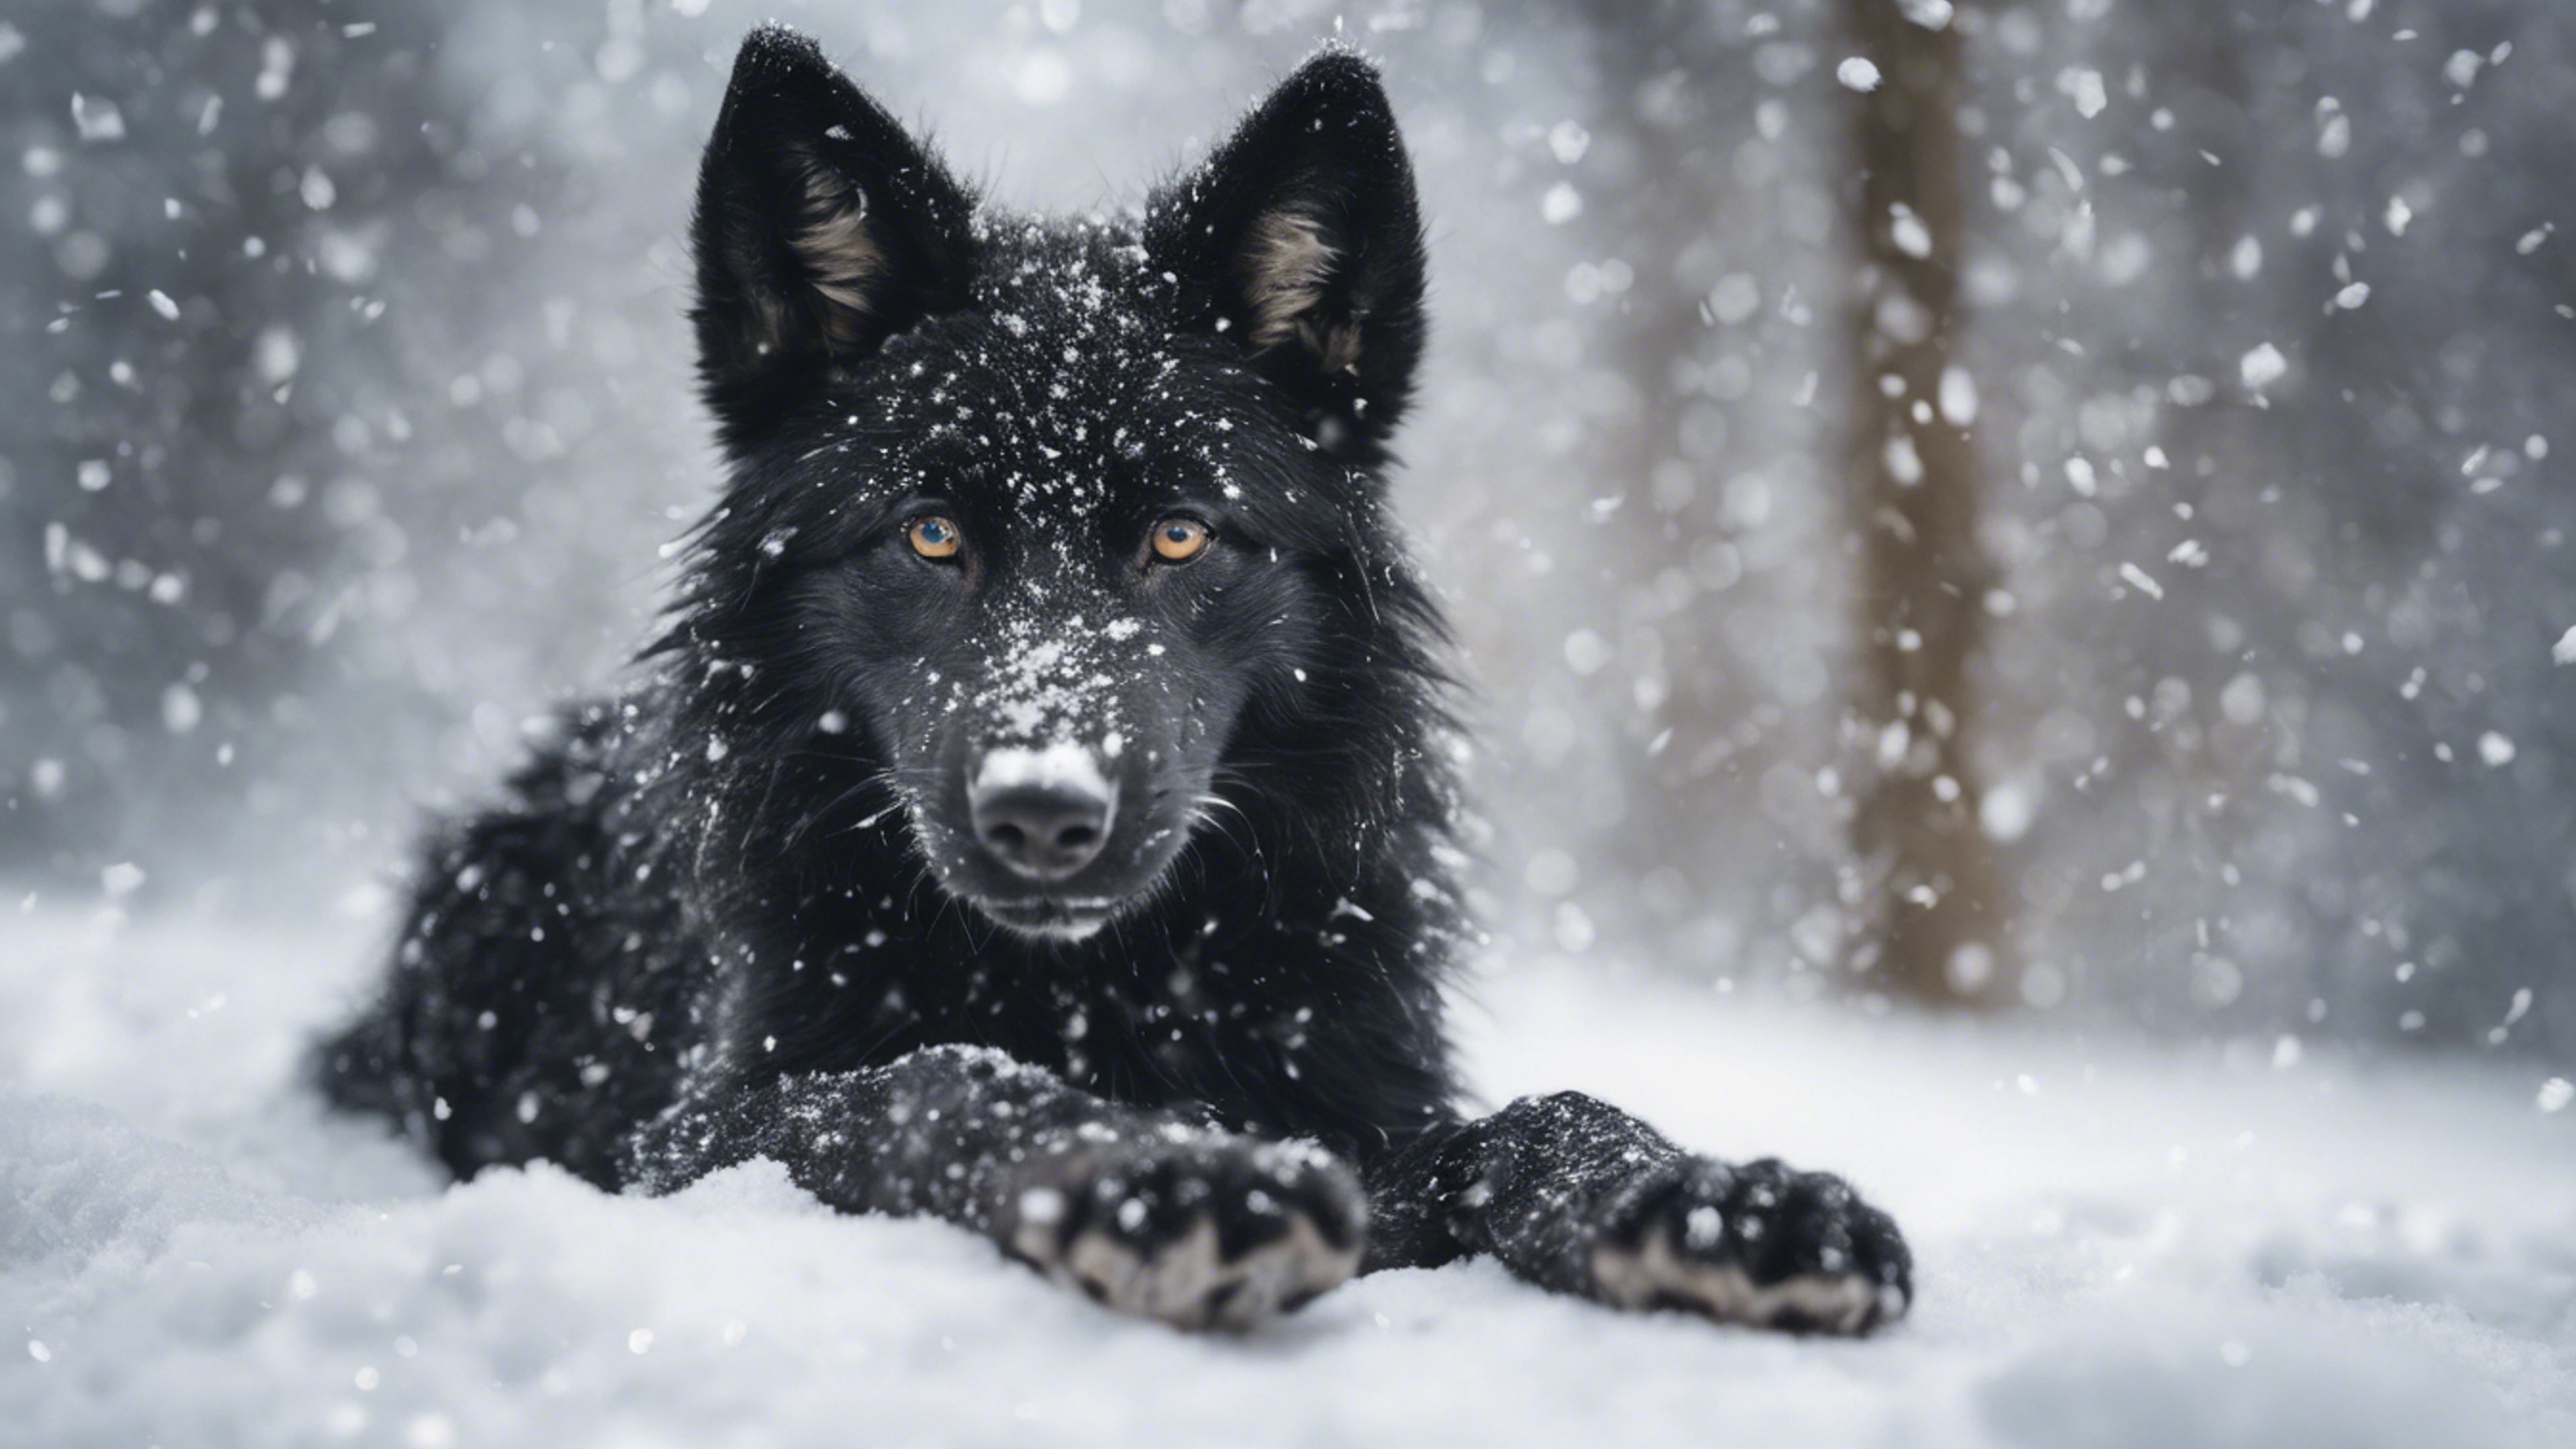 A playful black wolf puppy making the first snow angel of its life. Tapeta[6a2907d16c81420c9dae]